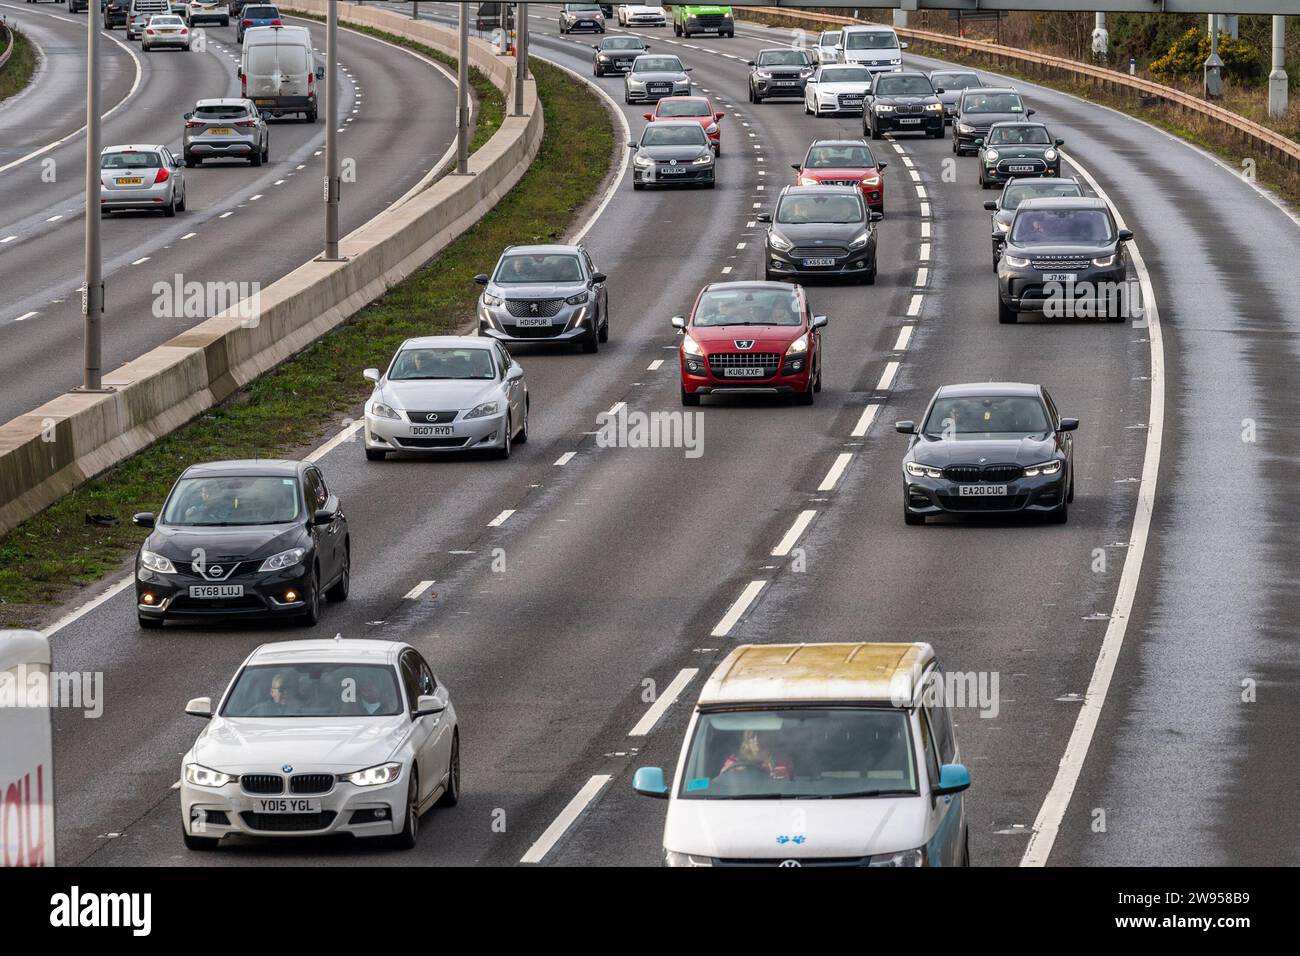 Birmingham, West Midlands, UK. 24th Dec, 2023. Despite many thousands of people making the holiday getaway on Christmas Eve, the M6 was moving freely today with no visible congestion on either carriageway. Credit: AG News/Alamy Live News Stock Photo